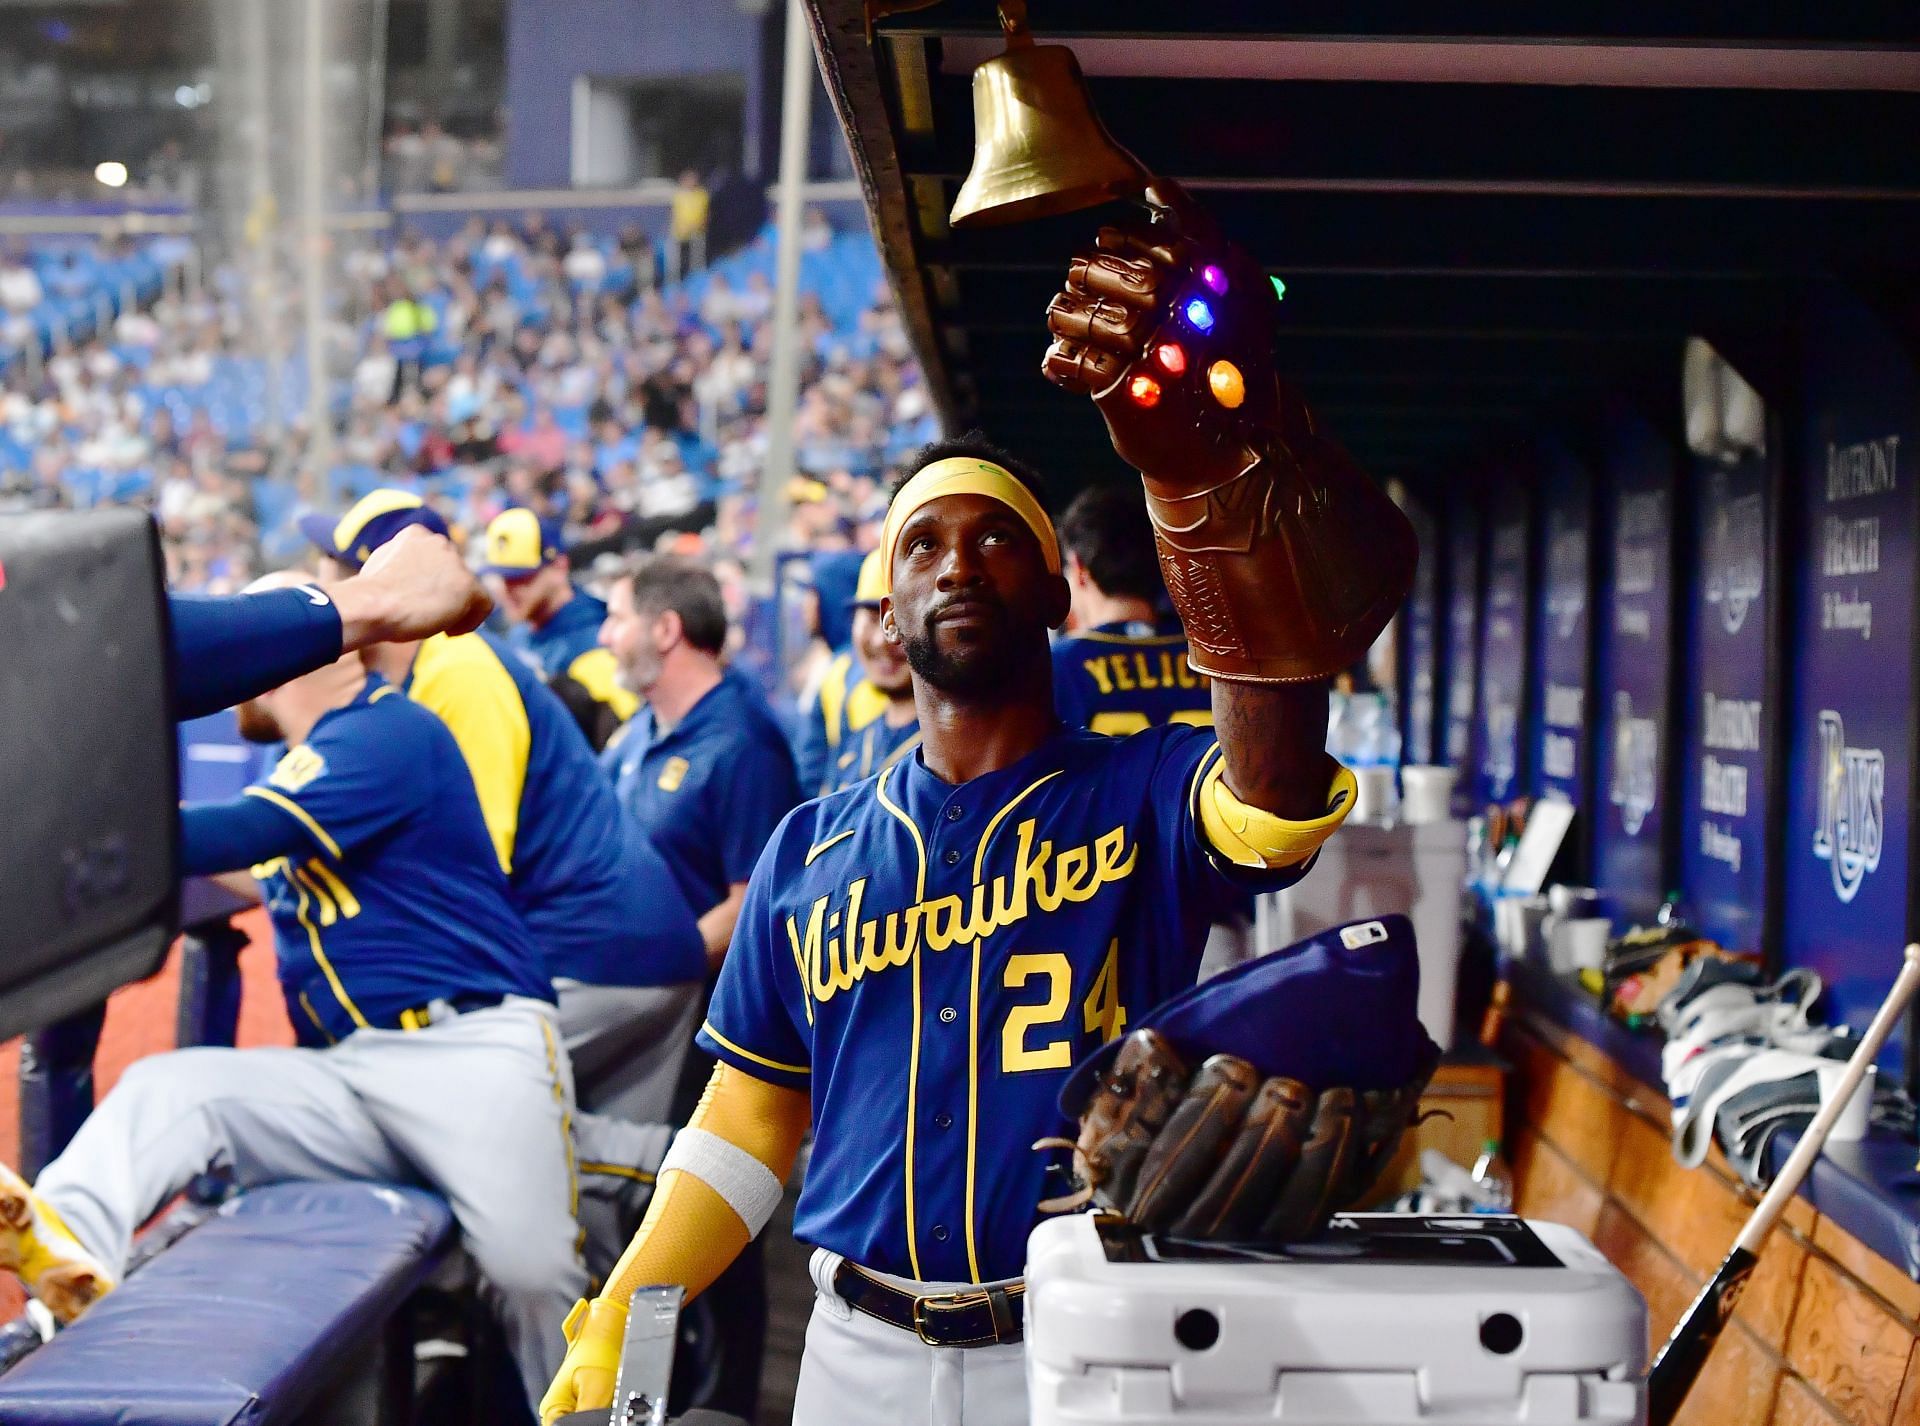 Andrew McCutchen brings out Thanos' Infinity Gauntlet to ring the  Milwaukee Brewers' bell after a spectacular play